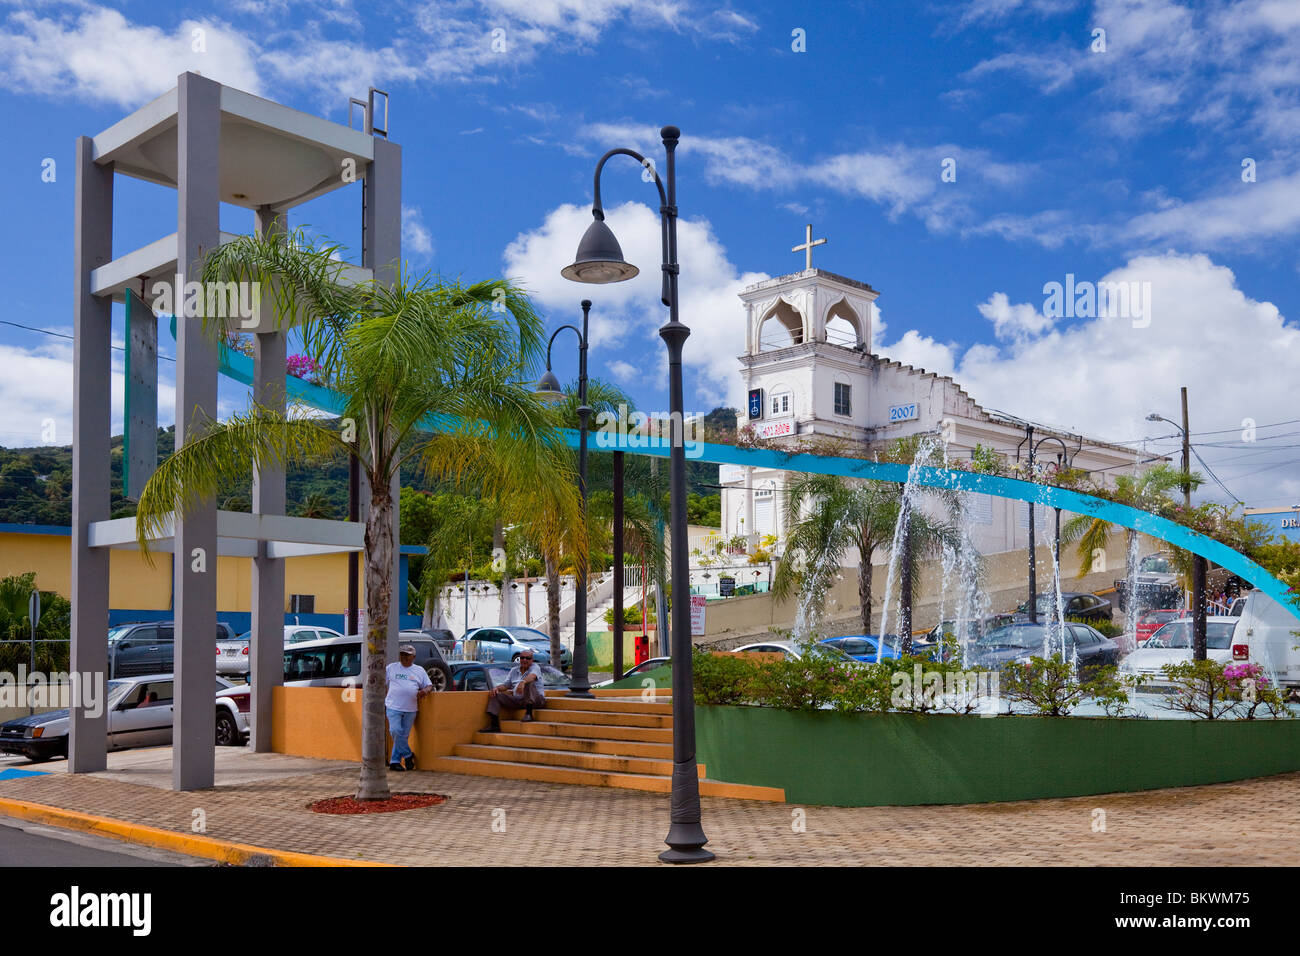 The town square in Yabucoa, Puerto Rico with decorative water fountain and church. Stock Photo